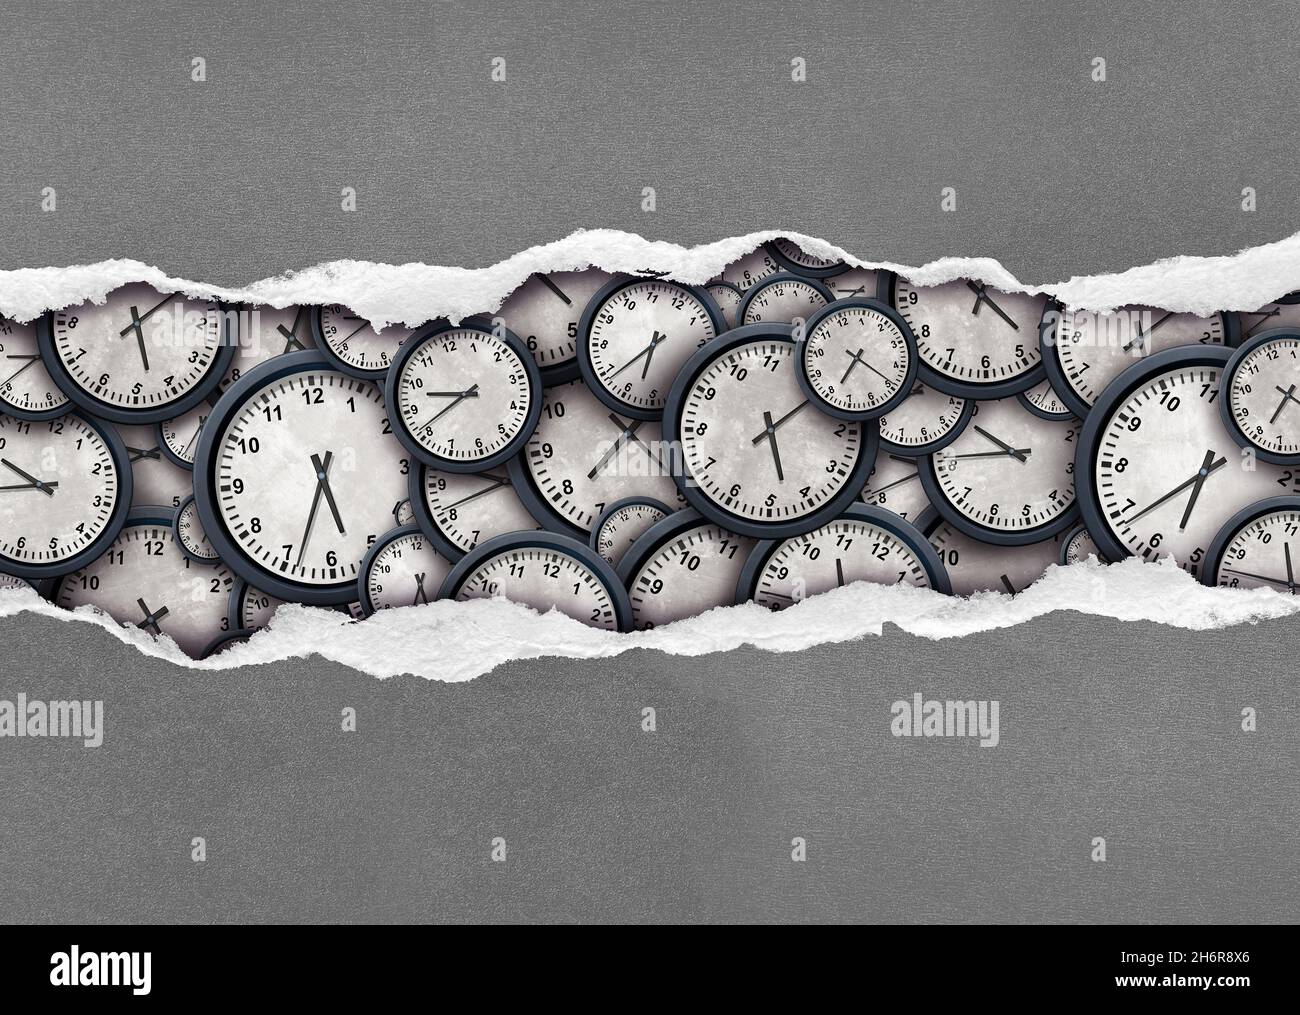 Time stress concept and business working hours as a busy schedule or deadline  or urgent pressure with ripped paper exposing hidden clocks and watches Stock Photo